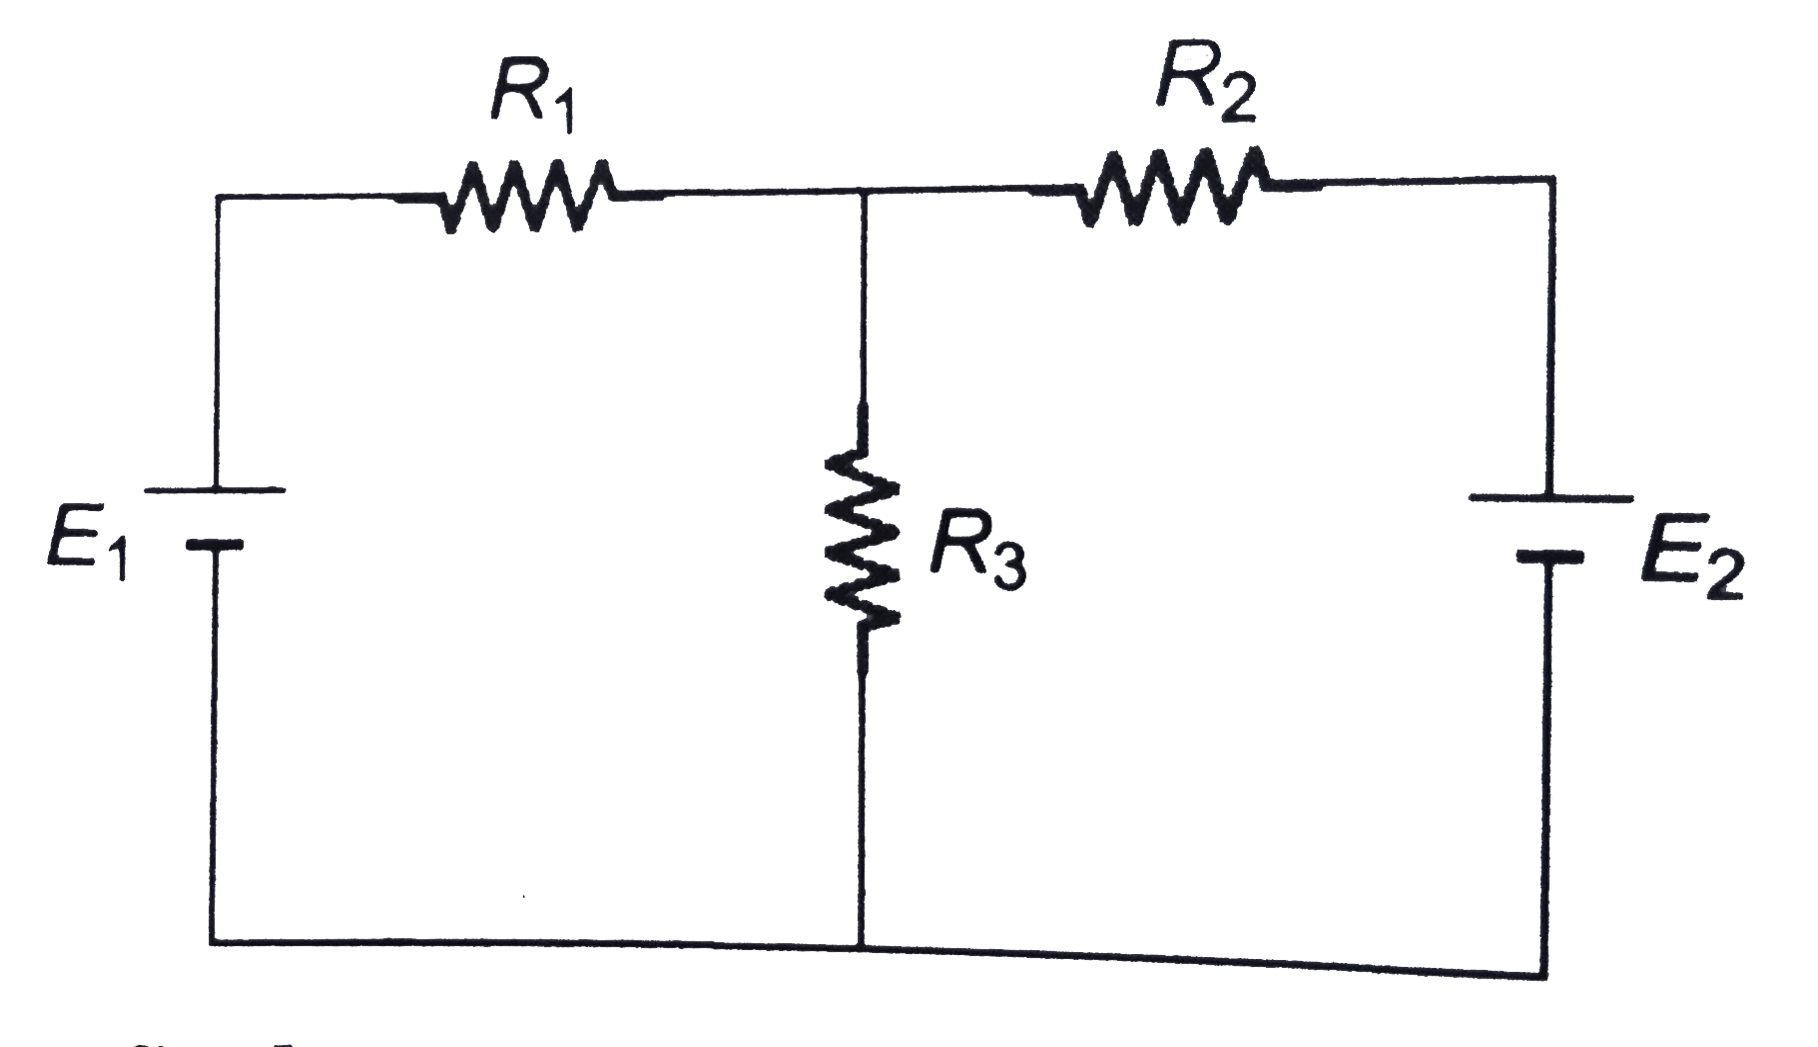 In the circuit shown in figure E1=7V,E2=1 V,R1=2Omega, R2=2Omega and R3=3Omega respectively. Find the power supplied by the two batteries.